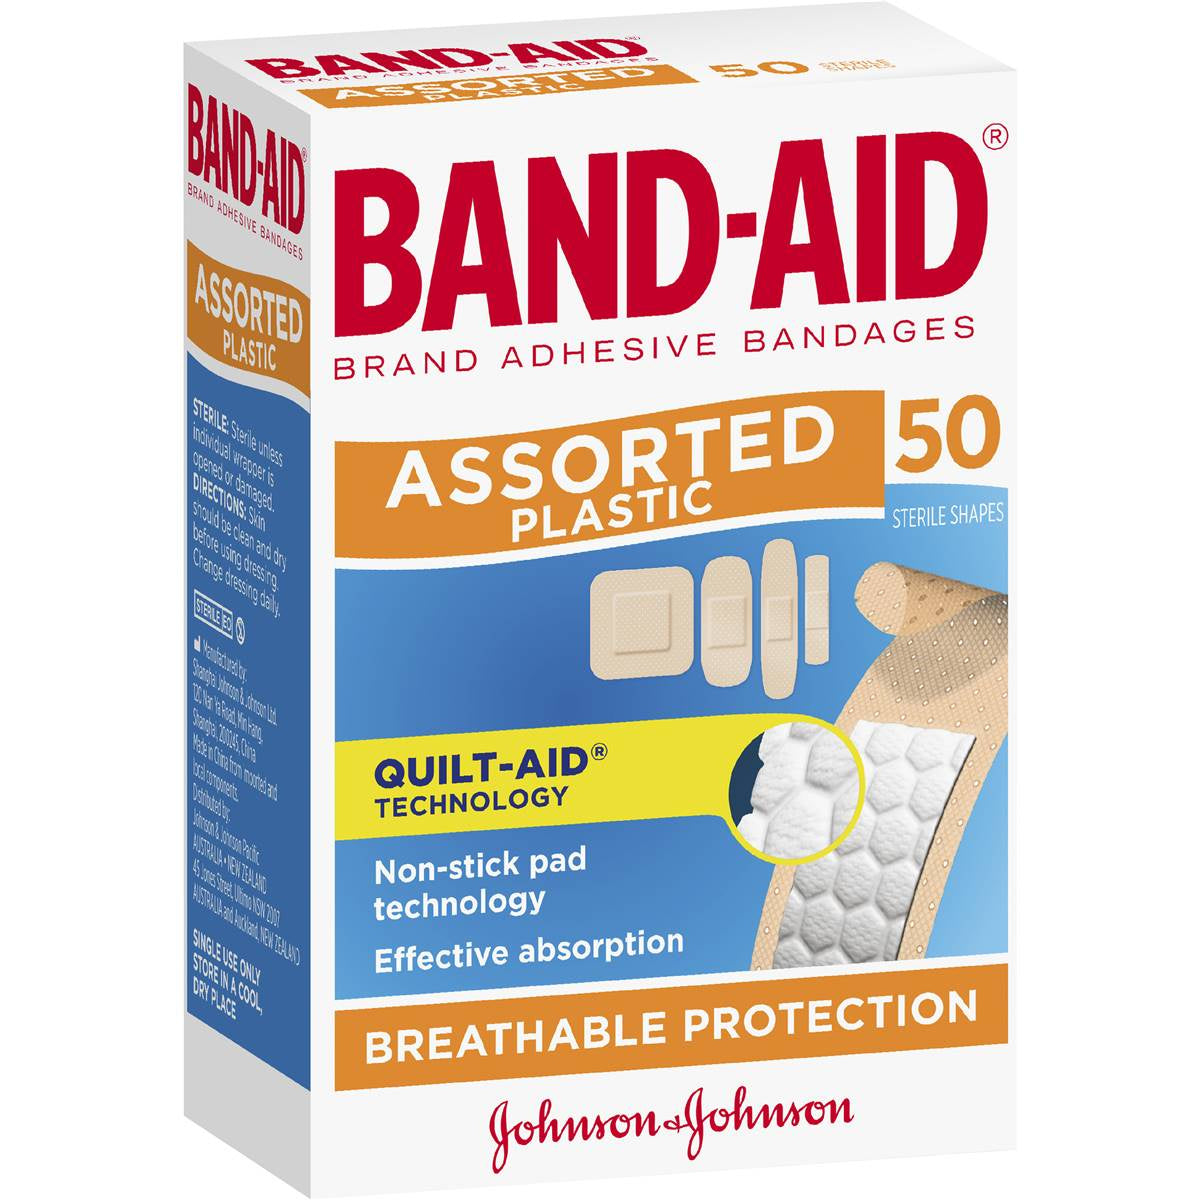 Band-aid Assorted 50pk